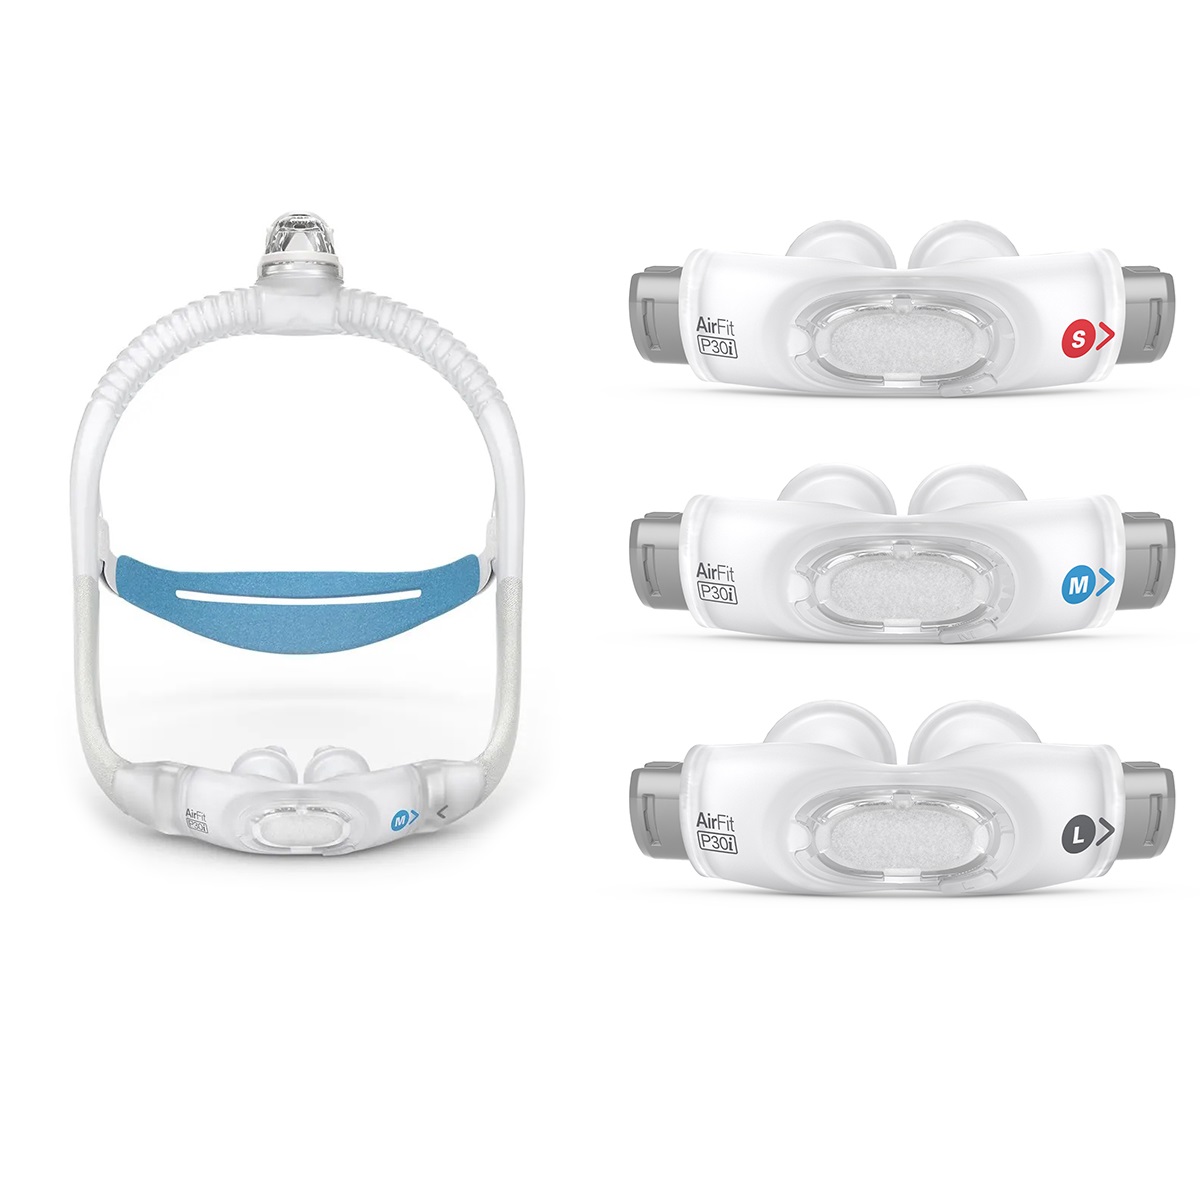 ResMed CPAP Nasal Pillows Mask : # 63851 Airfit P30i Starter Pack - Small , Small frame with sm, med and lg pillow cushions-/catalog/nasal_pillows/resmed/p30i-01